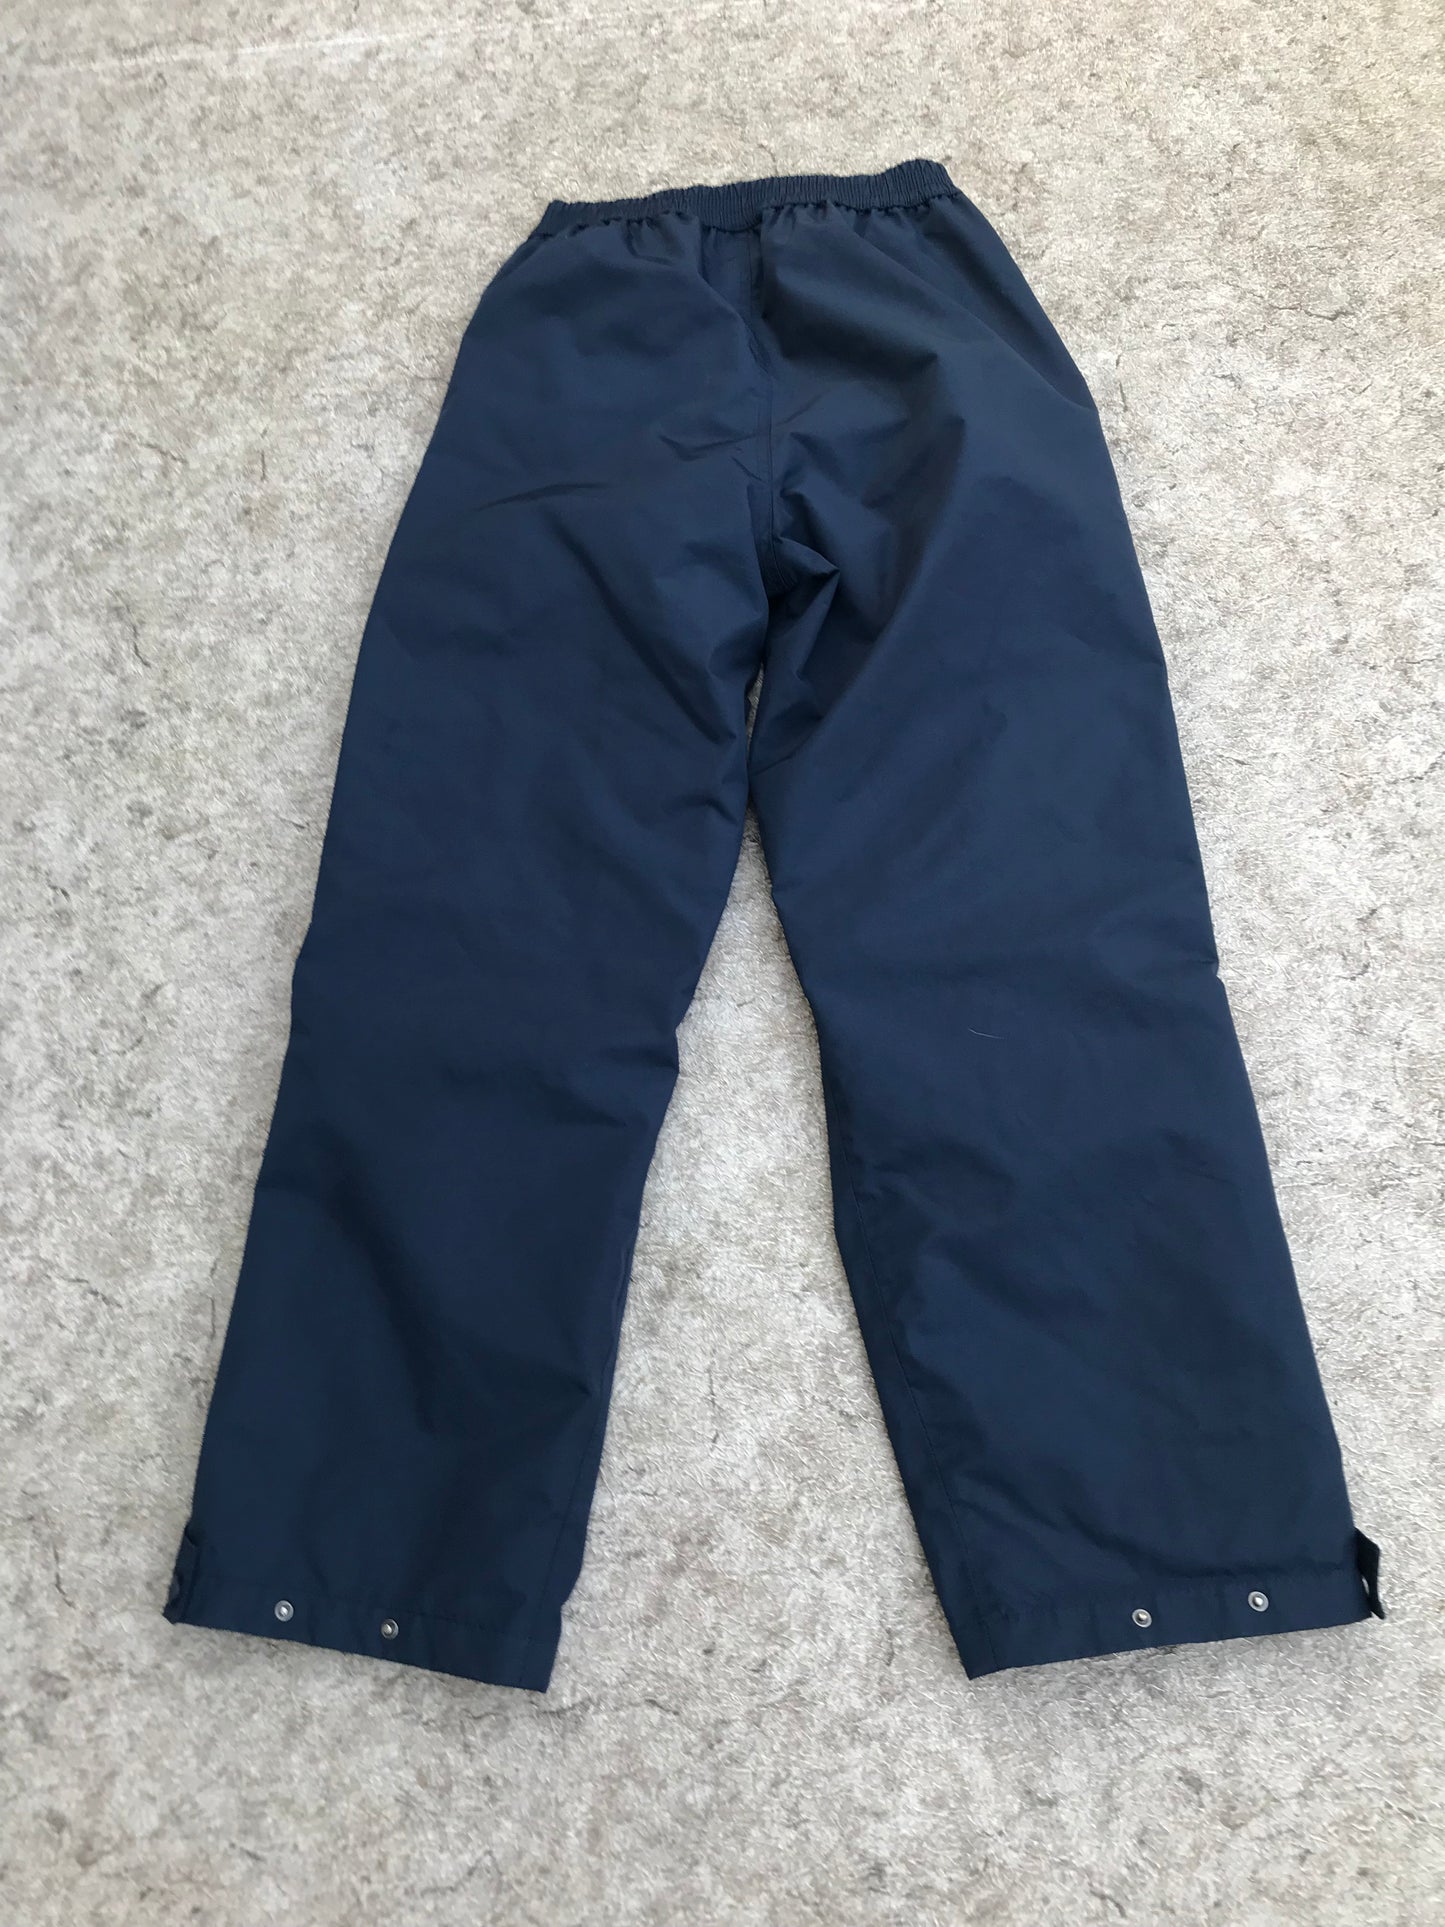 Rain Pants Ladies Size Small Helly Hansen Marine Blue Zippers Part Way Up Both Legs Excellent